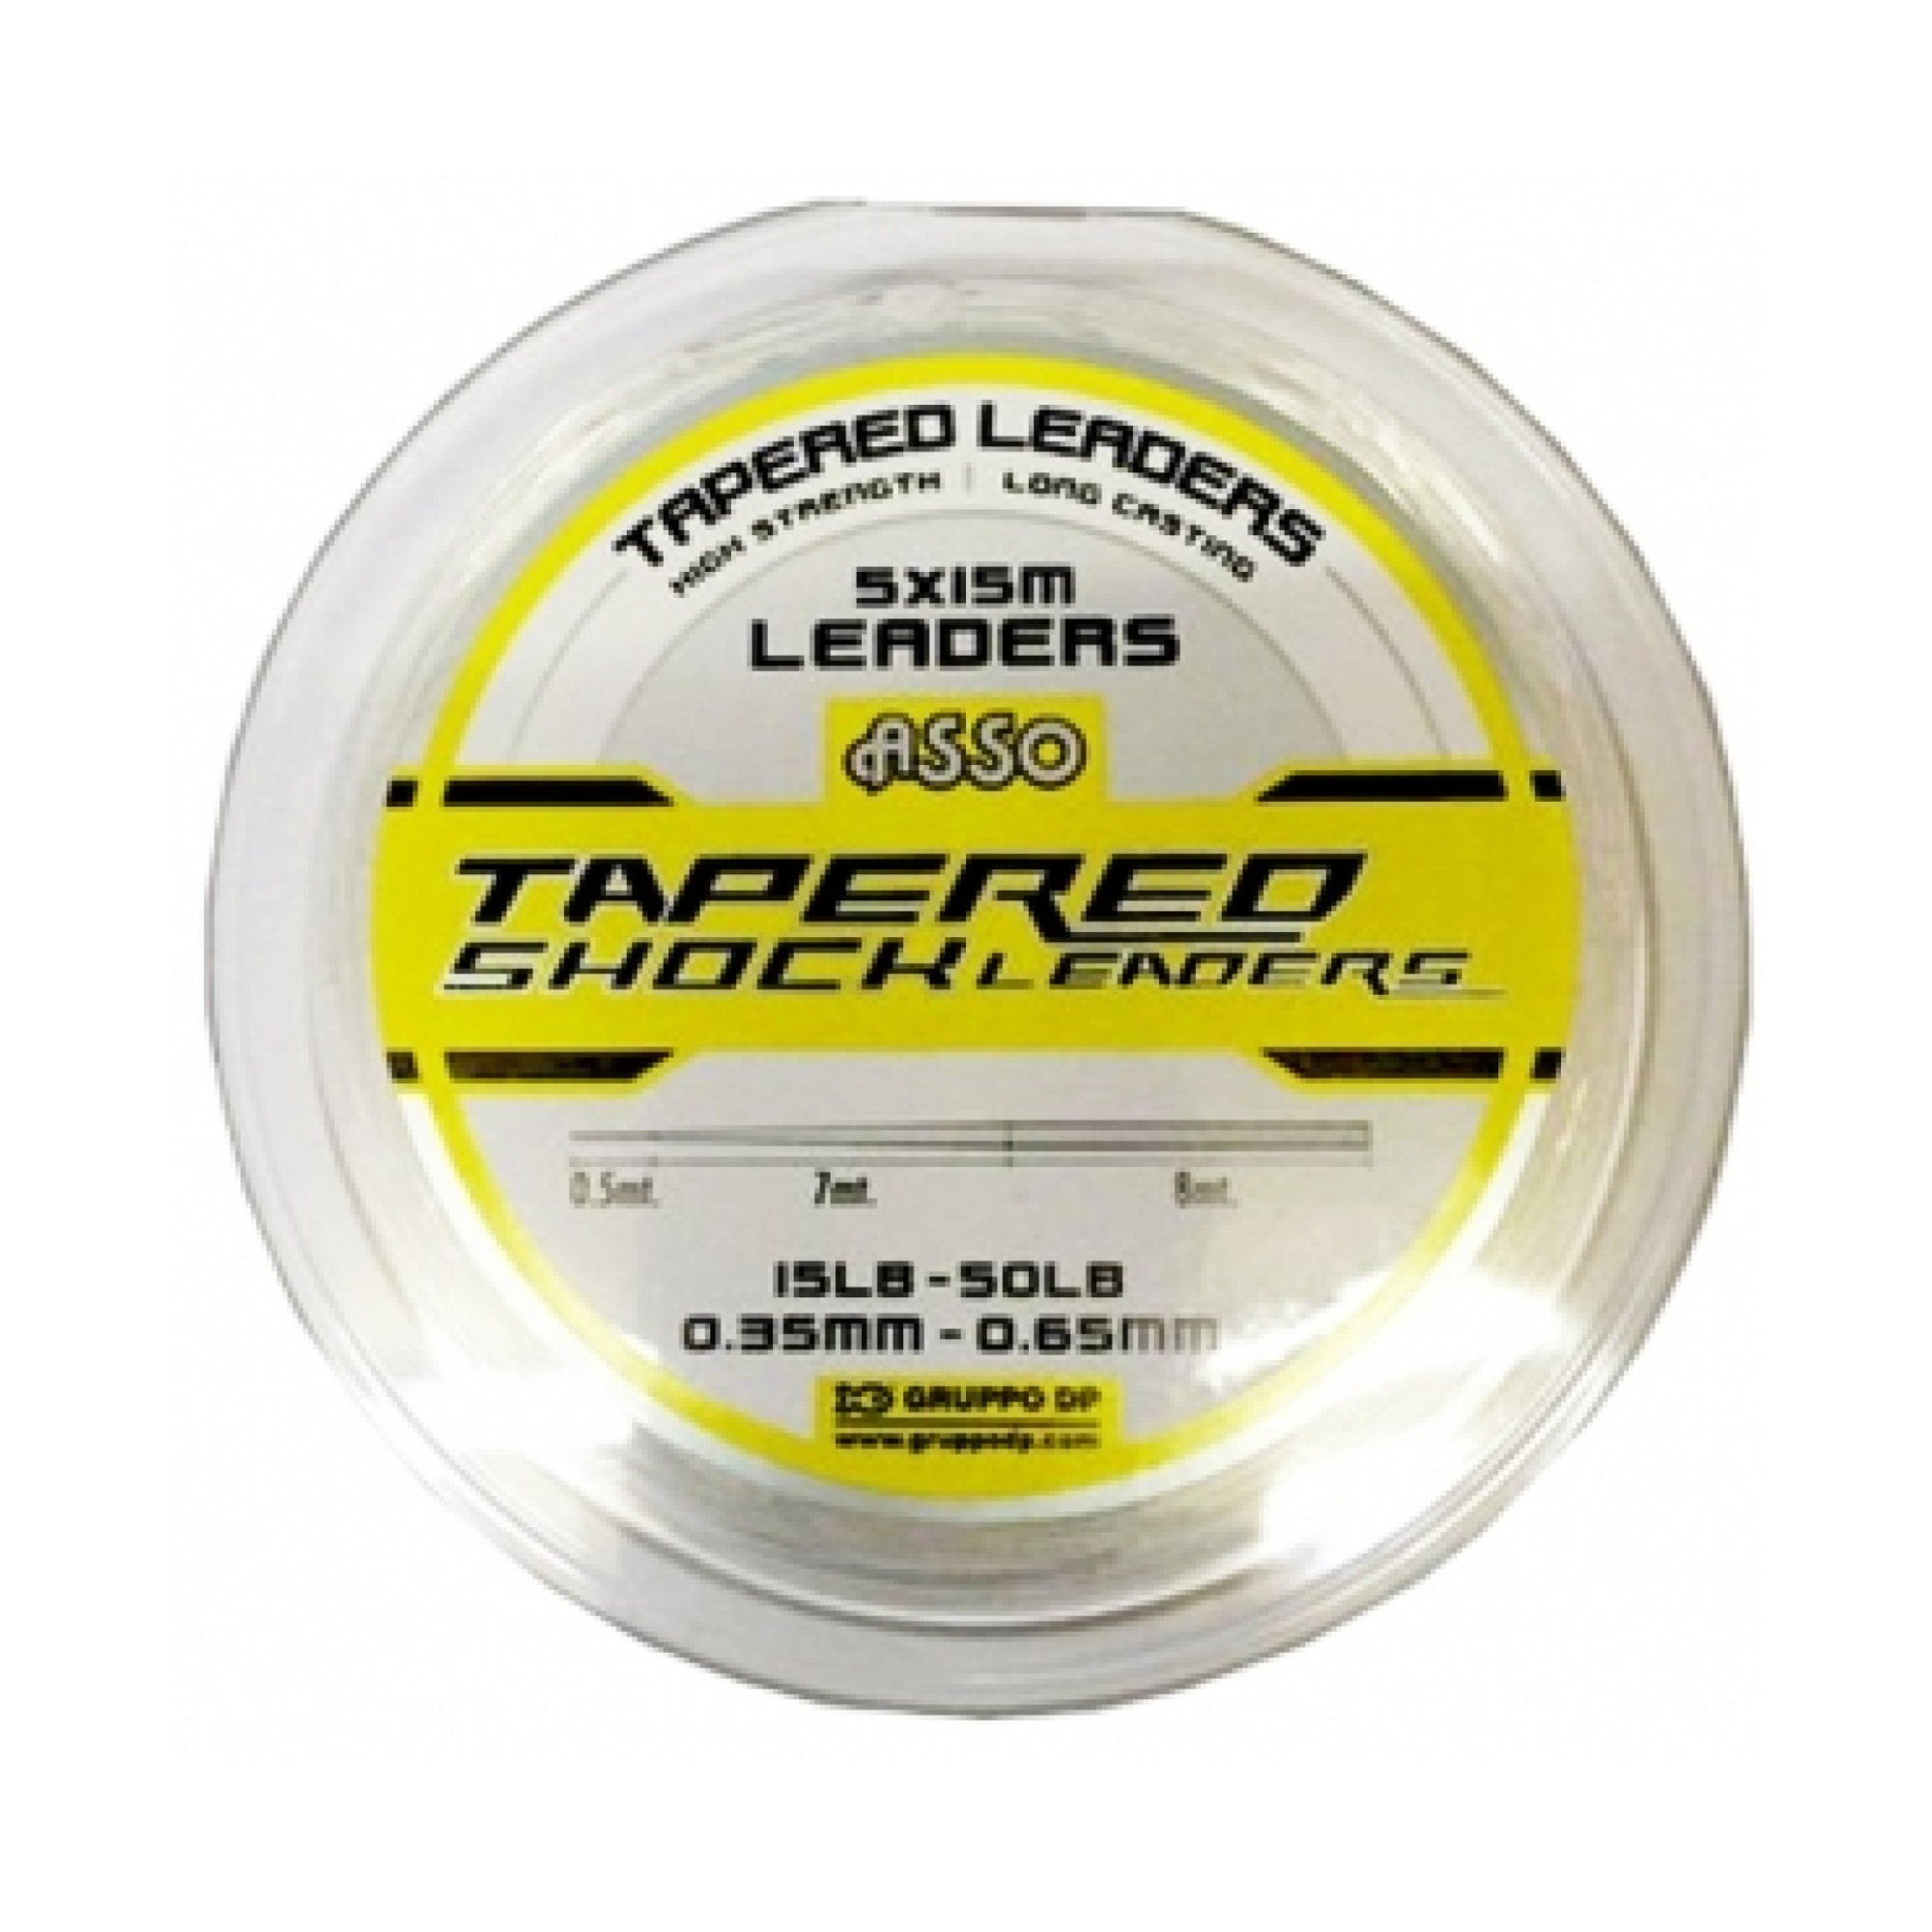 Asso Protector Long Casting Tapered Shock Leaders 50-70lb x 5 